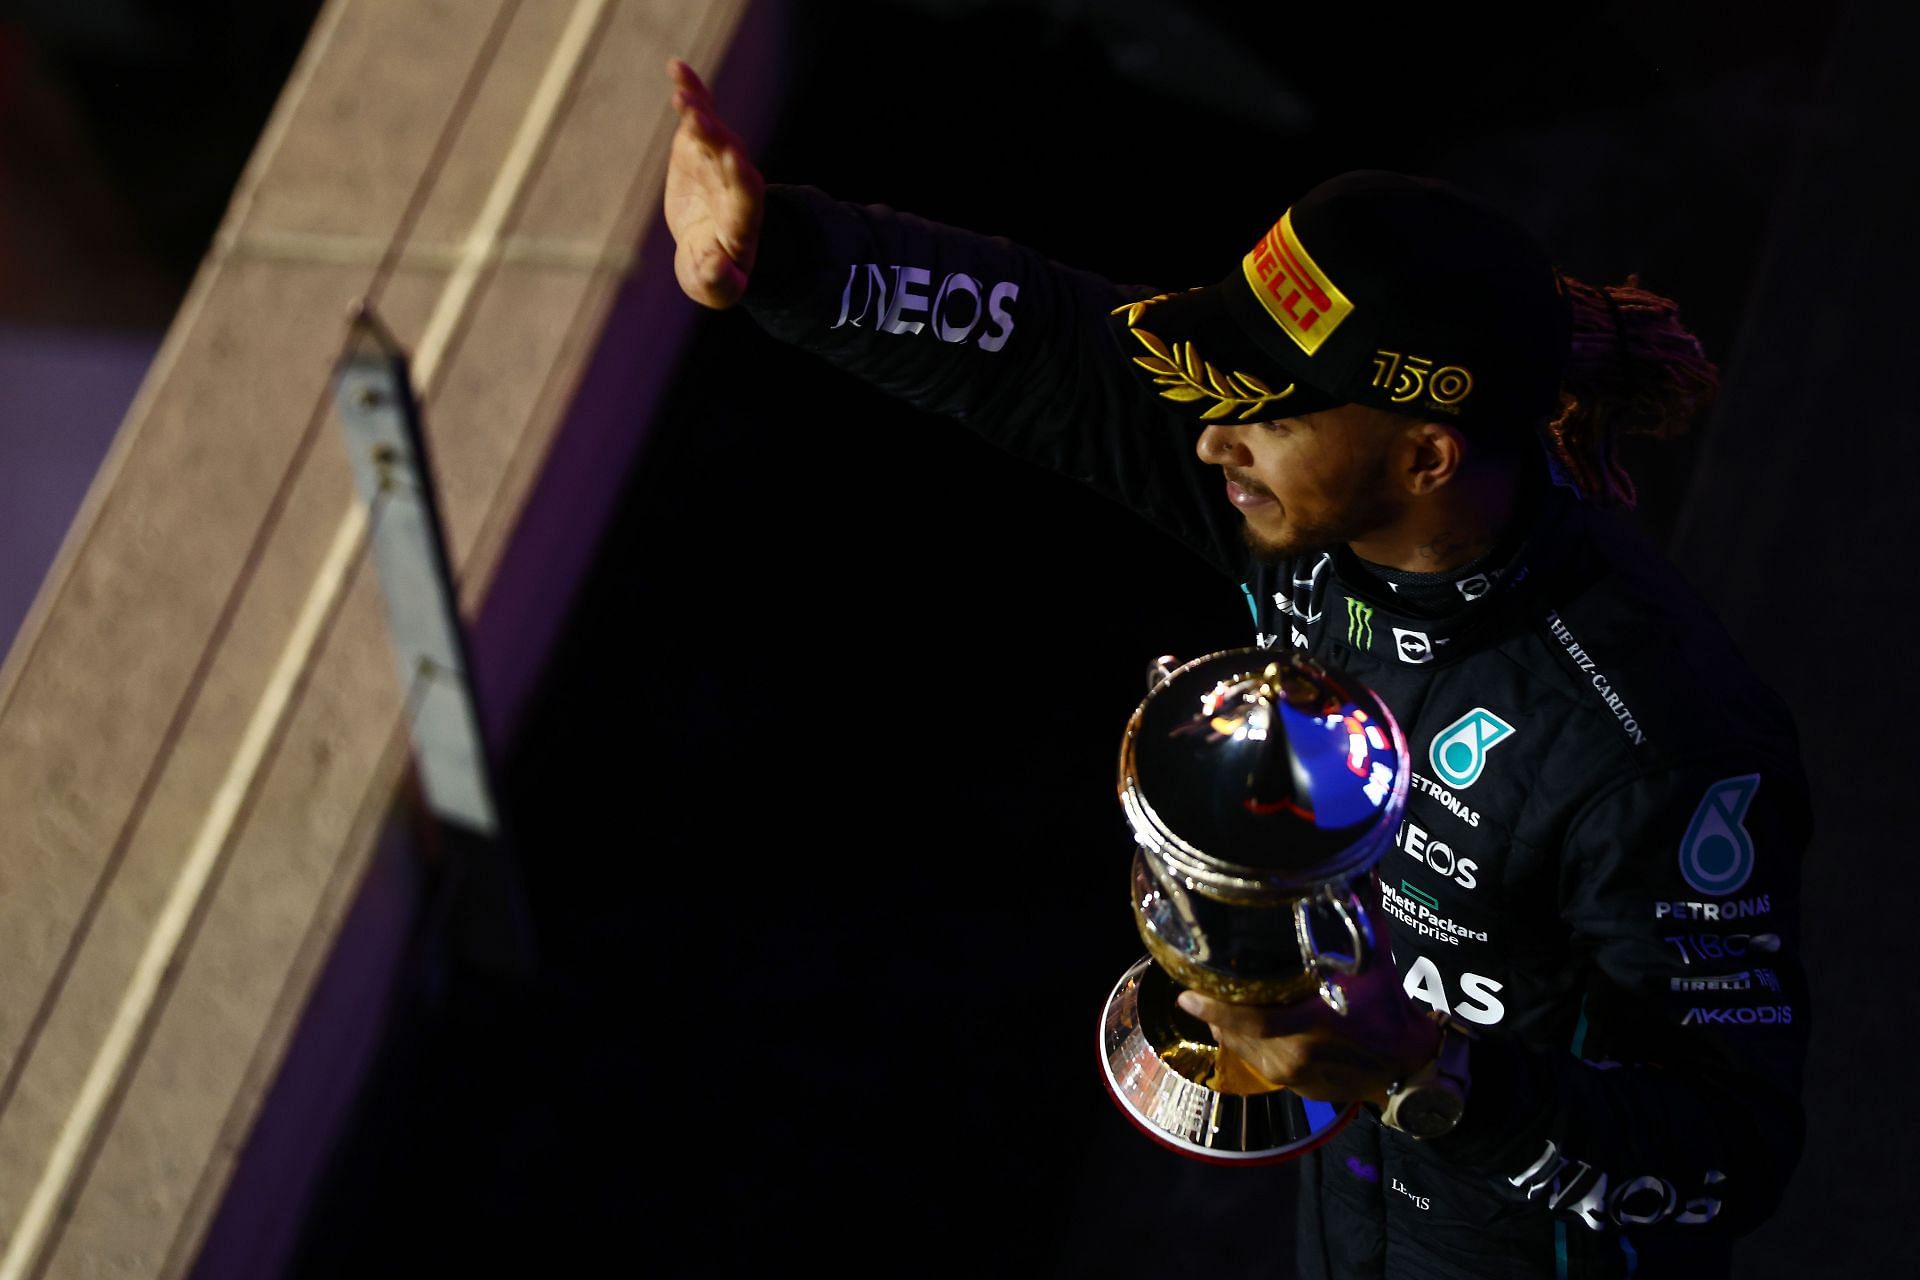 Lewis Hamilton celebrates on the podium during the F1 Grand Prix of Bahrain (Photo by Lars Baron/Getty Images)